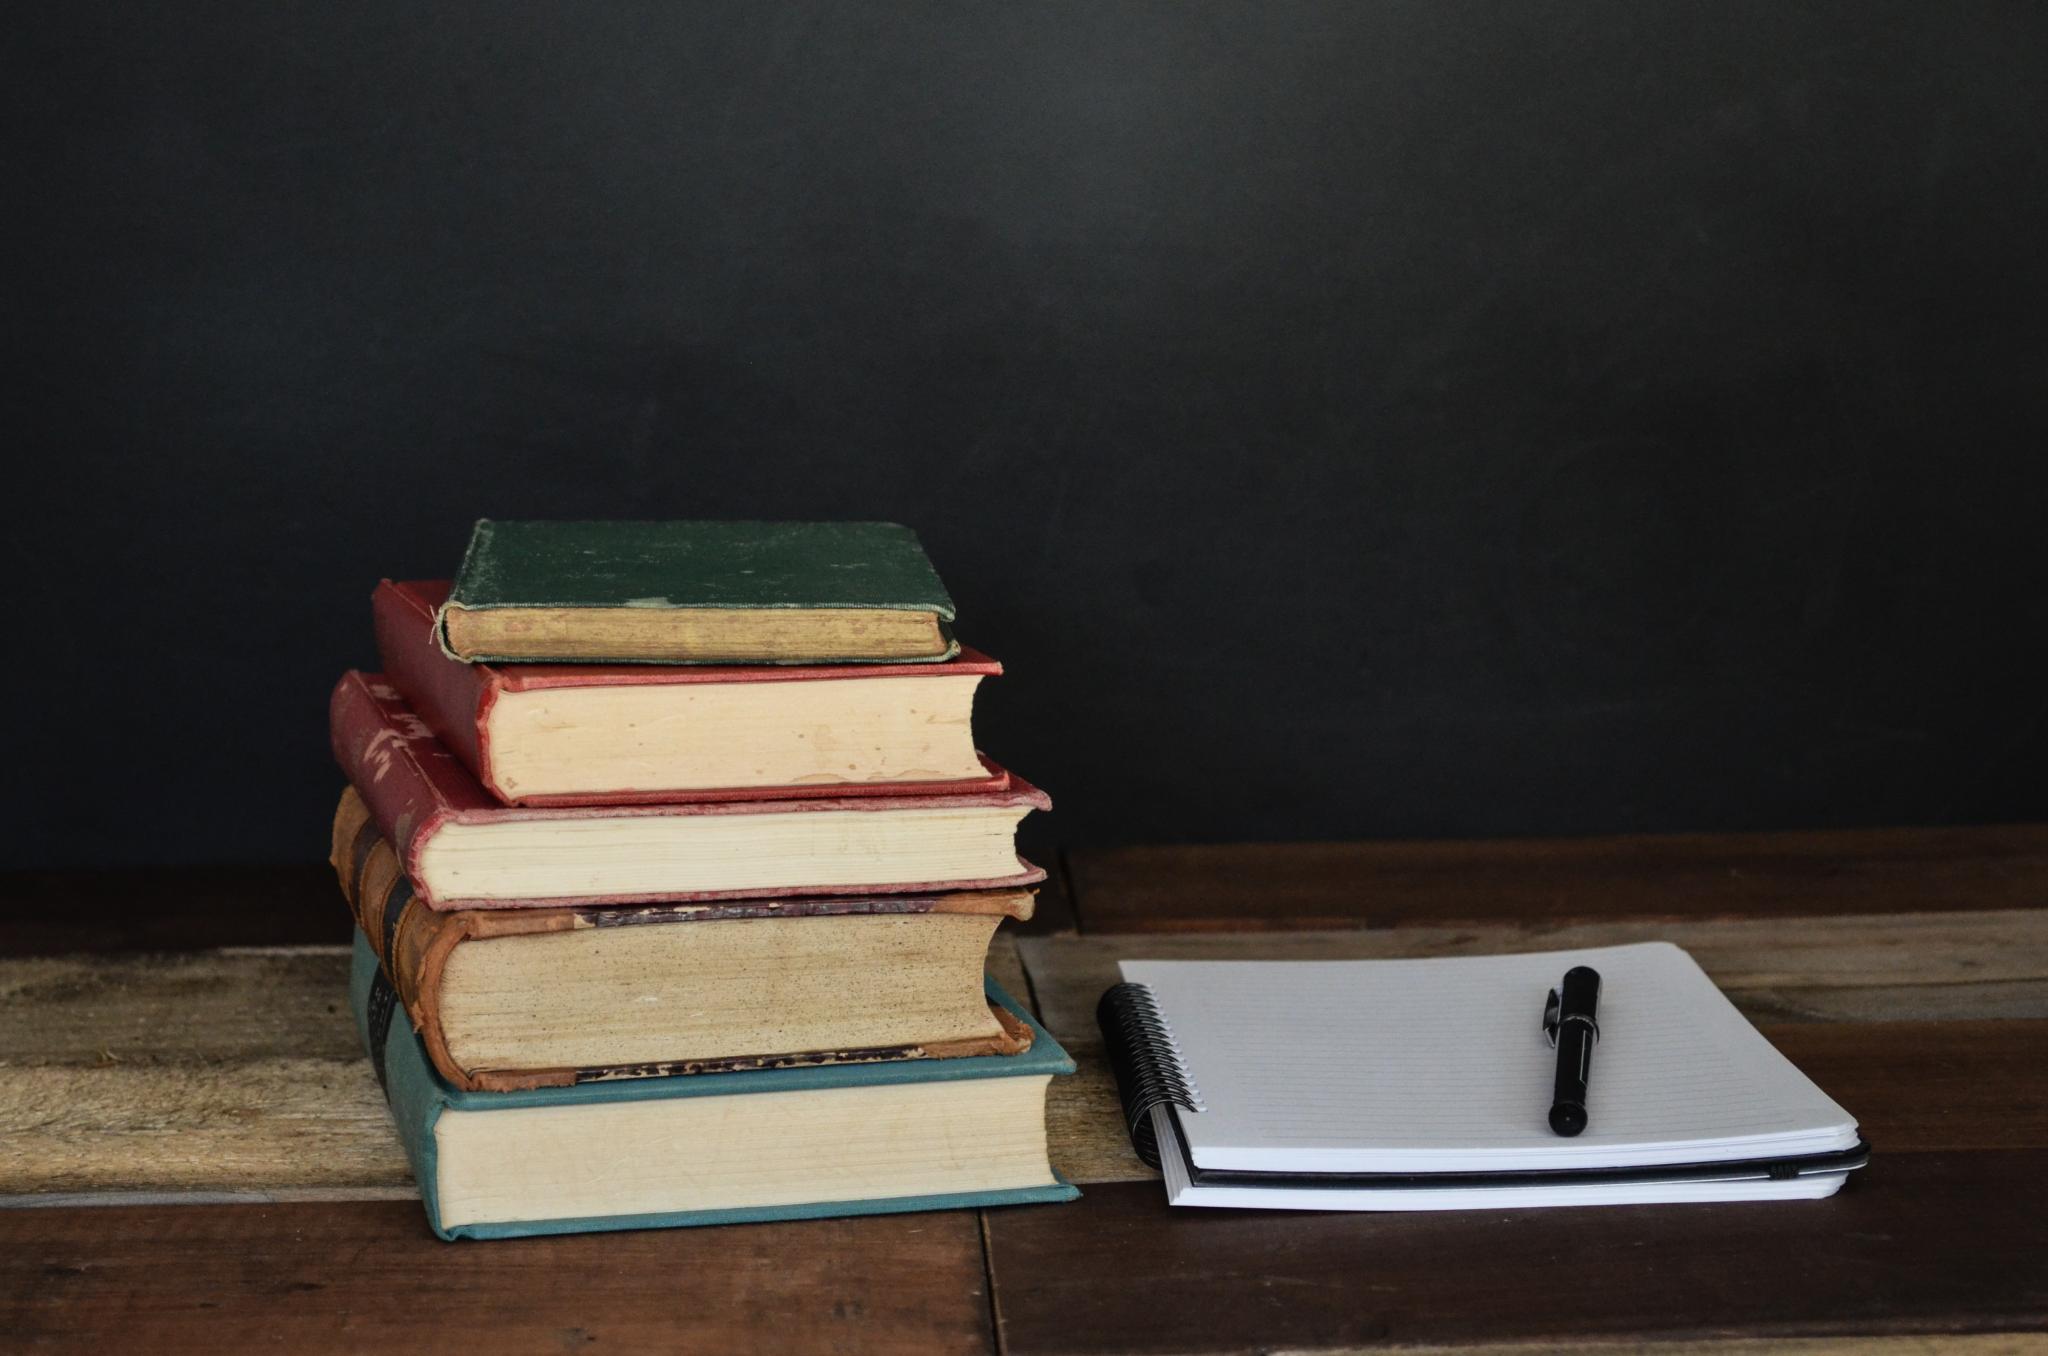 on left a stack of books, on right a notepad, against a dark background